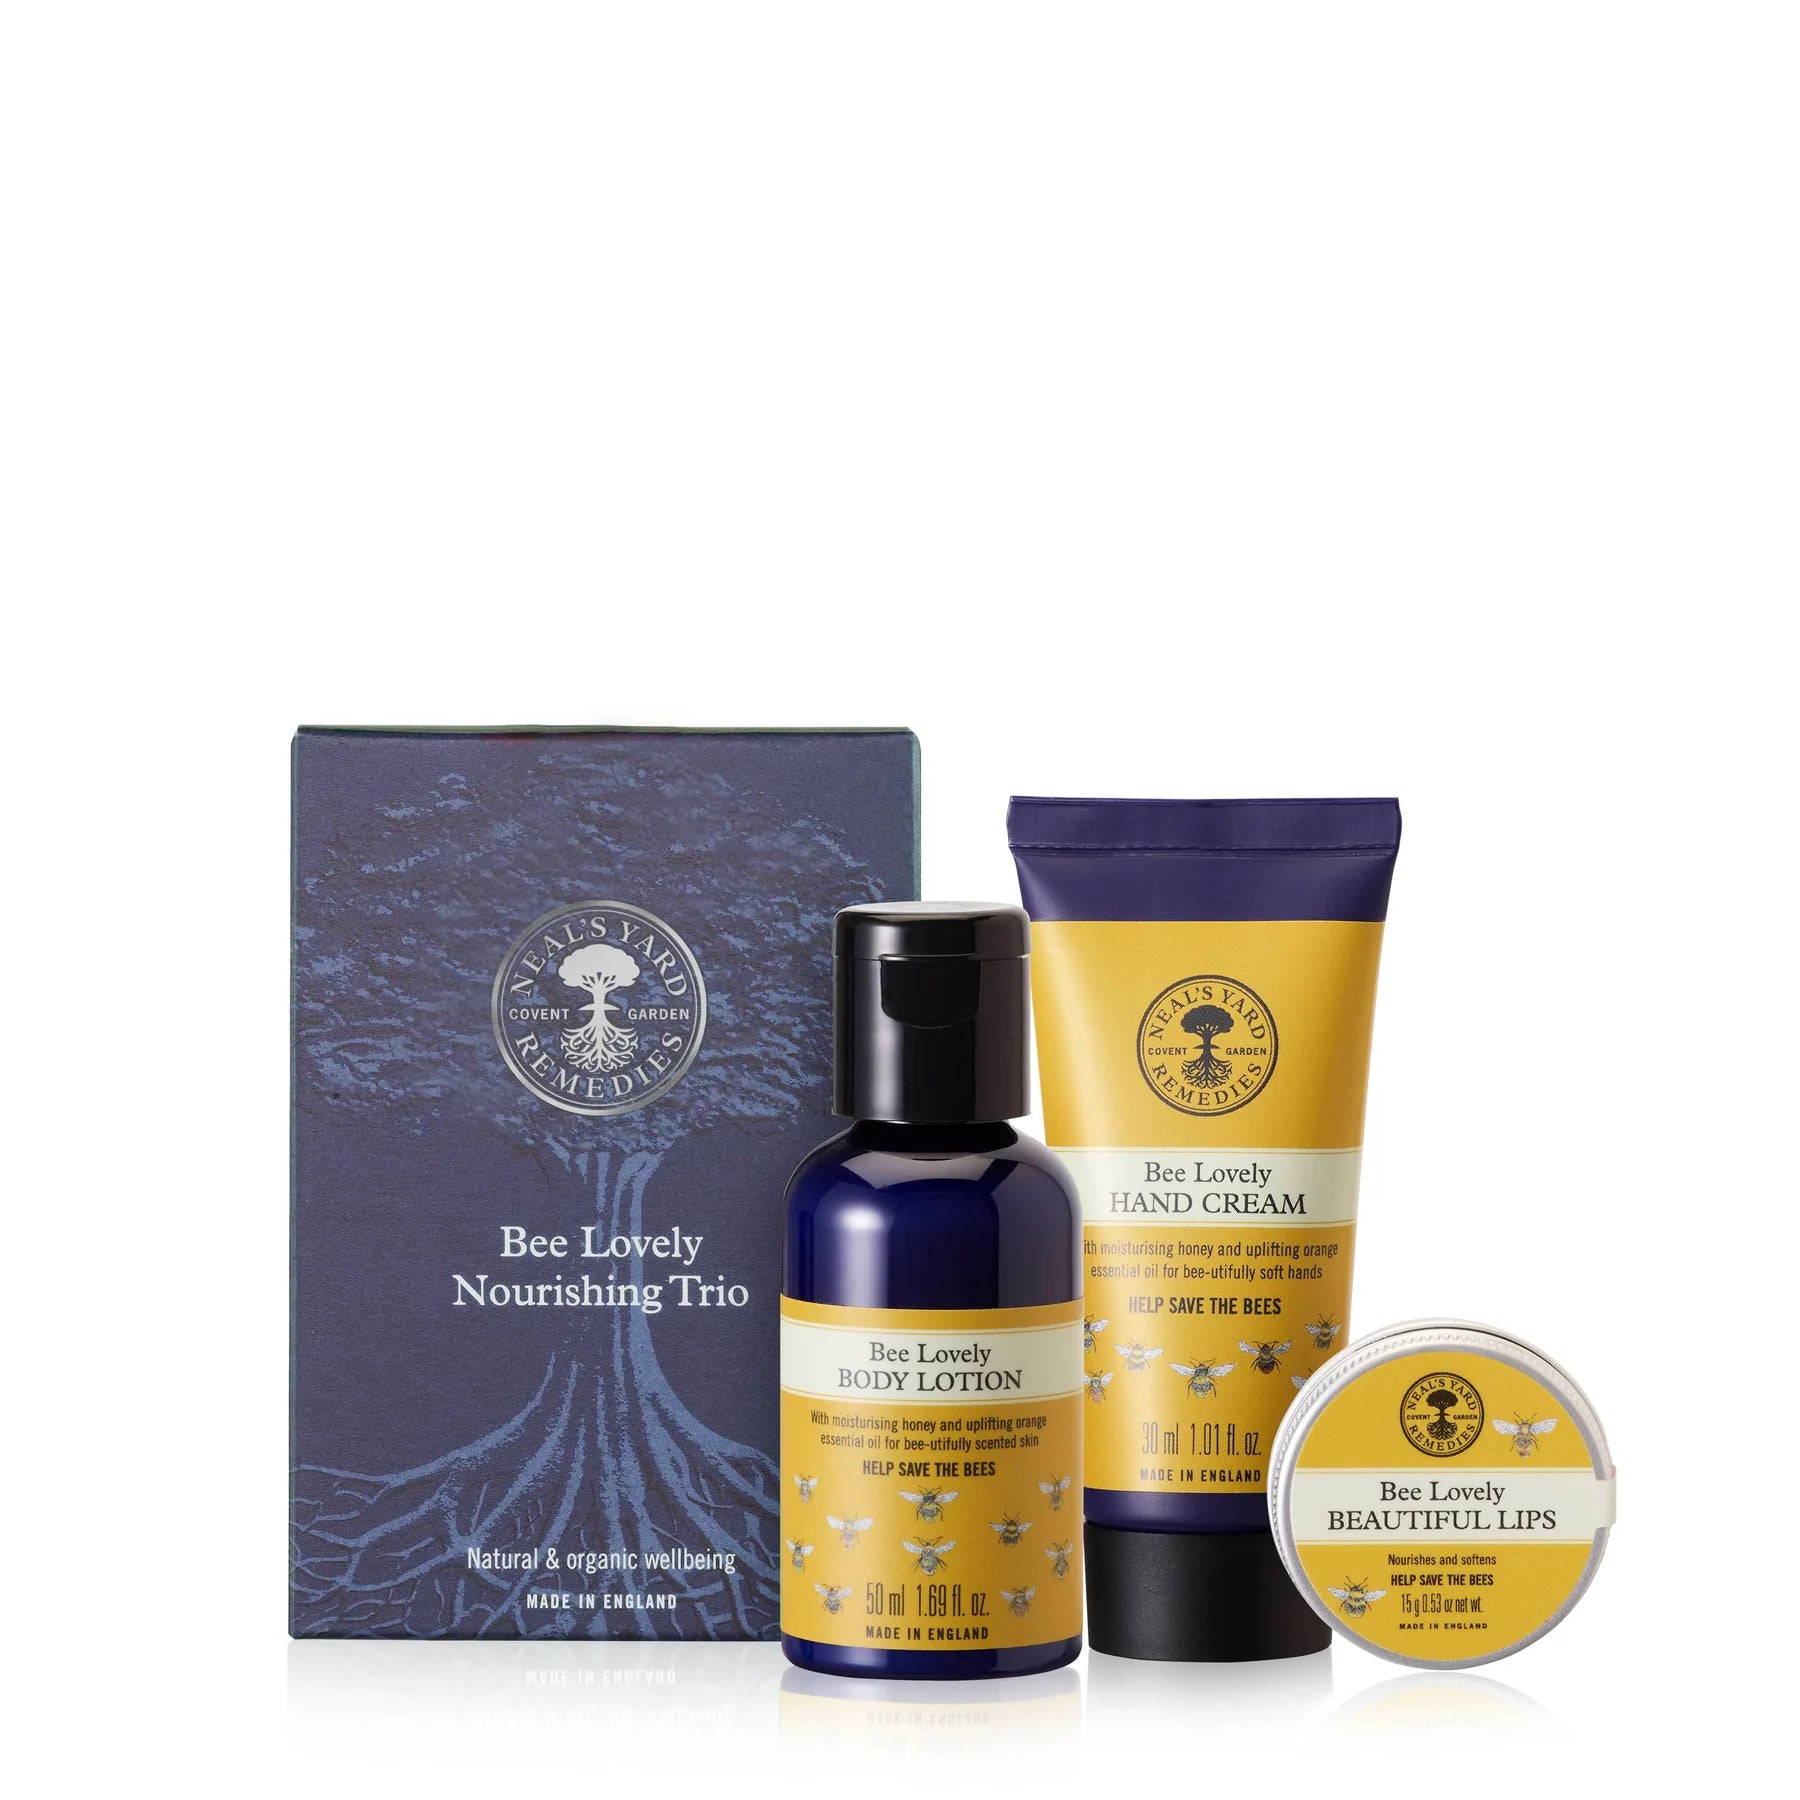 Gift set of Bee friendly products.  Body lotion, hand cream and lip balm in a gift box.